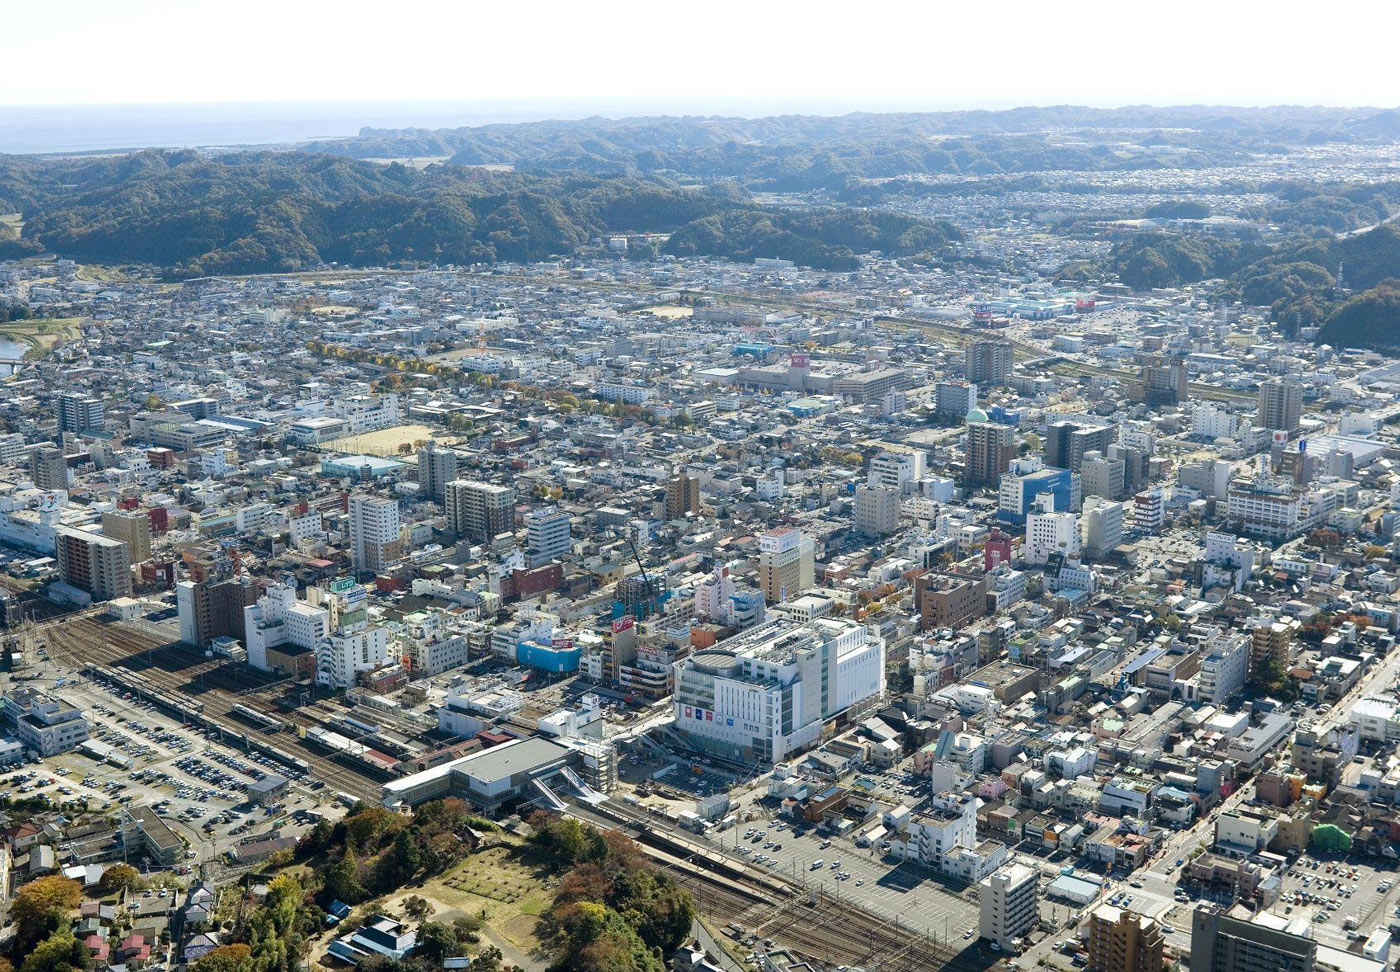 Iwaki is one of the largest cities in Fukushima prefecture